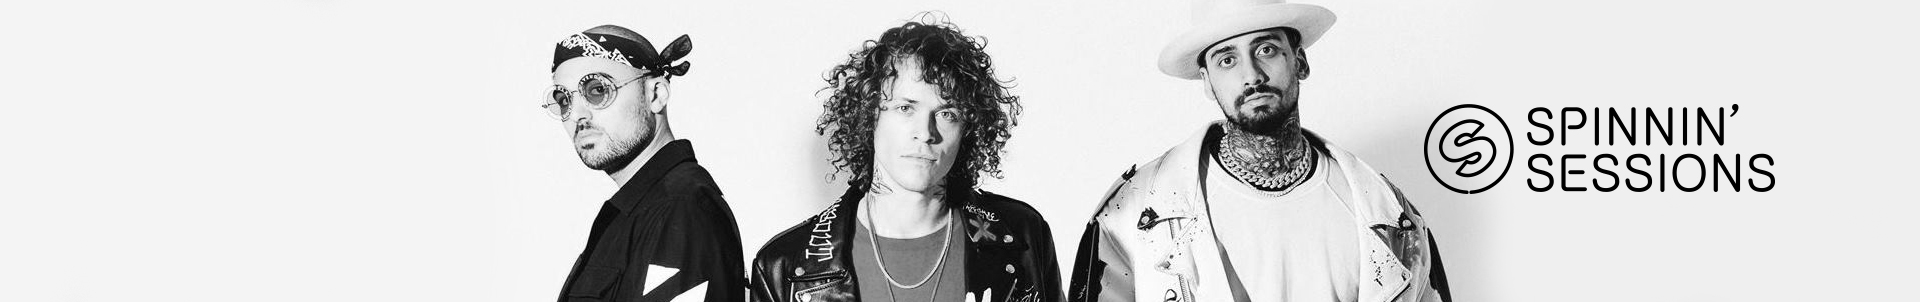 Cheat Codes plays Guest Mix at Sessions show